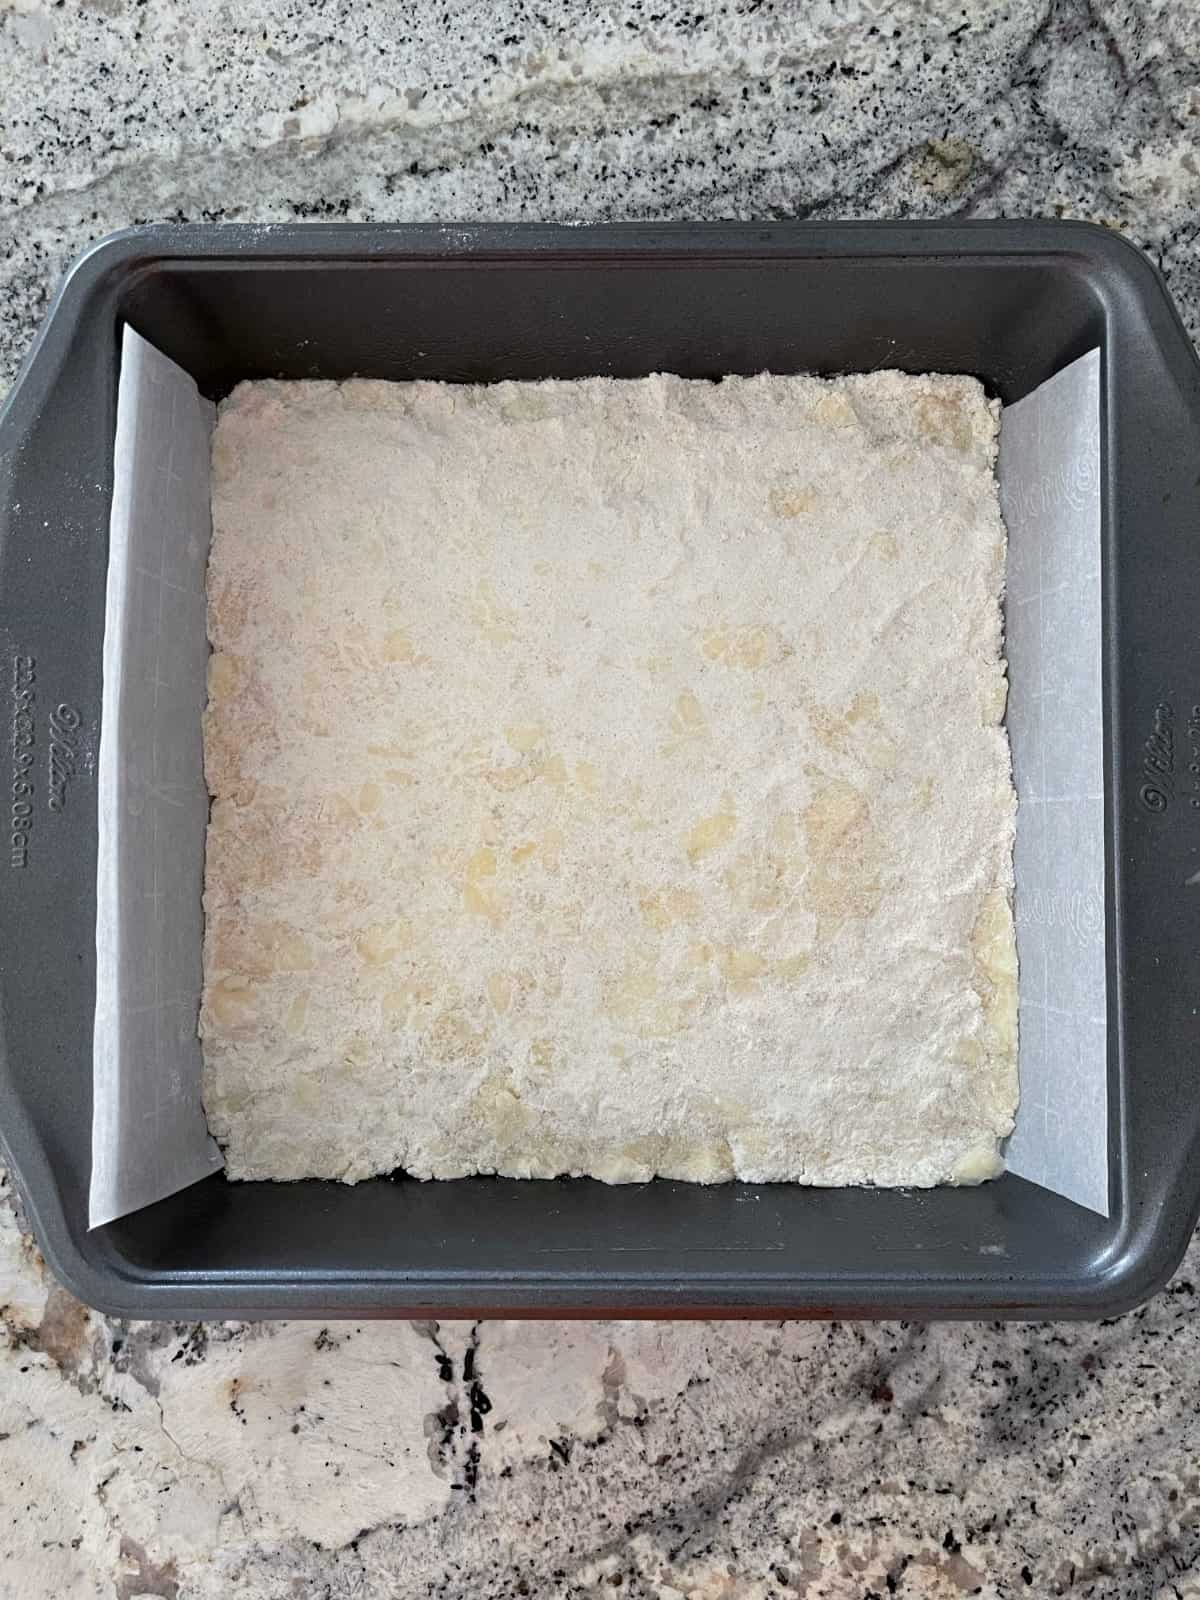 Unbaked lemon bar crust in square baking pan lined with parchment paper.